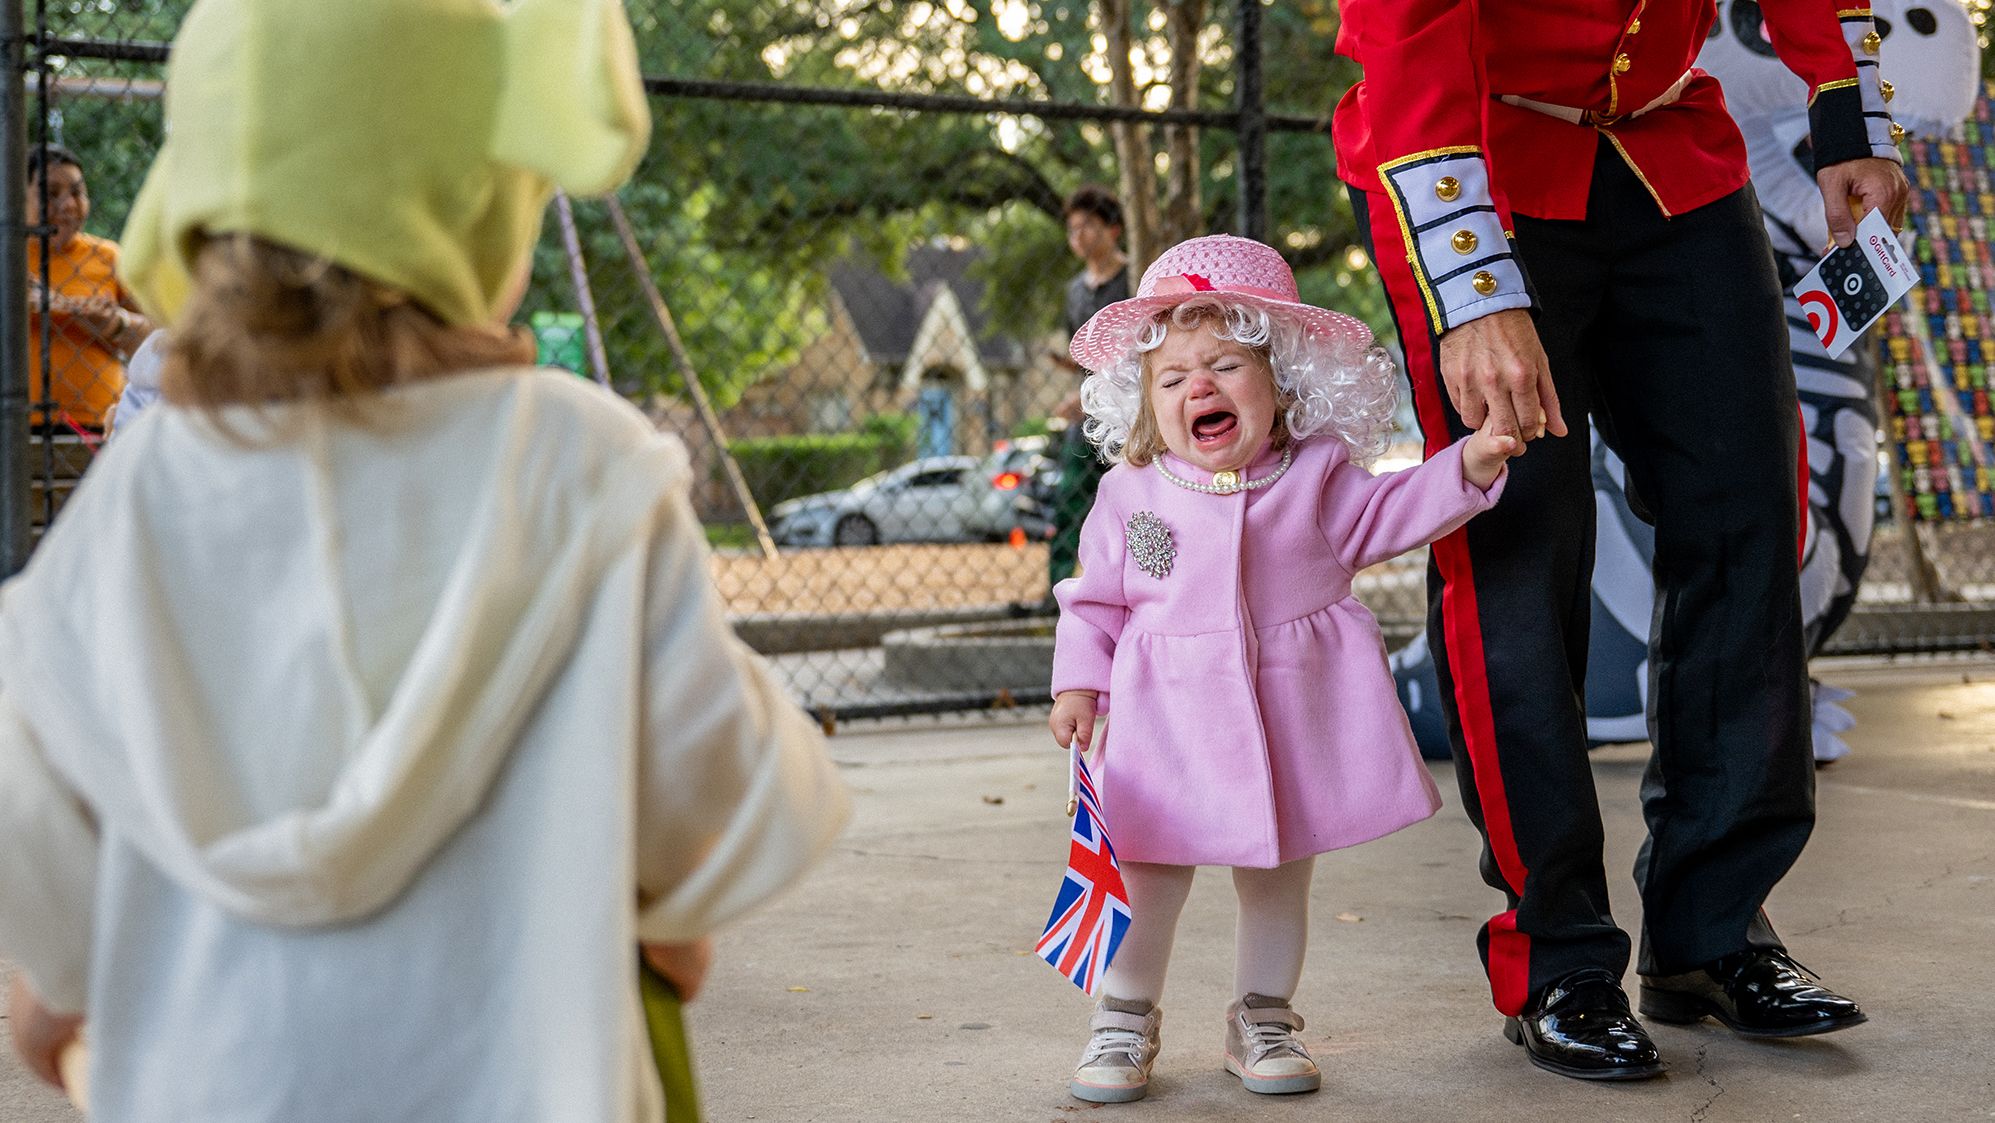 Madeline Evans begins to cry after winning a costume contest dressed as the late Queen Elizabeth II on Monday, October 31, in Houston, Texas.